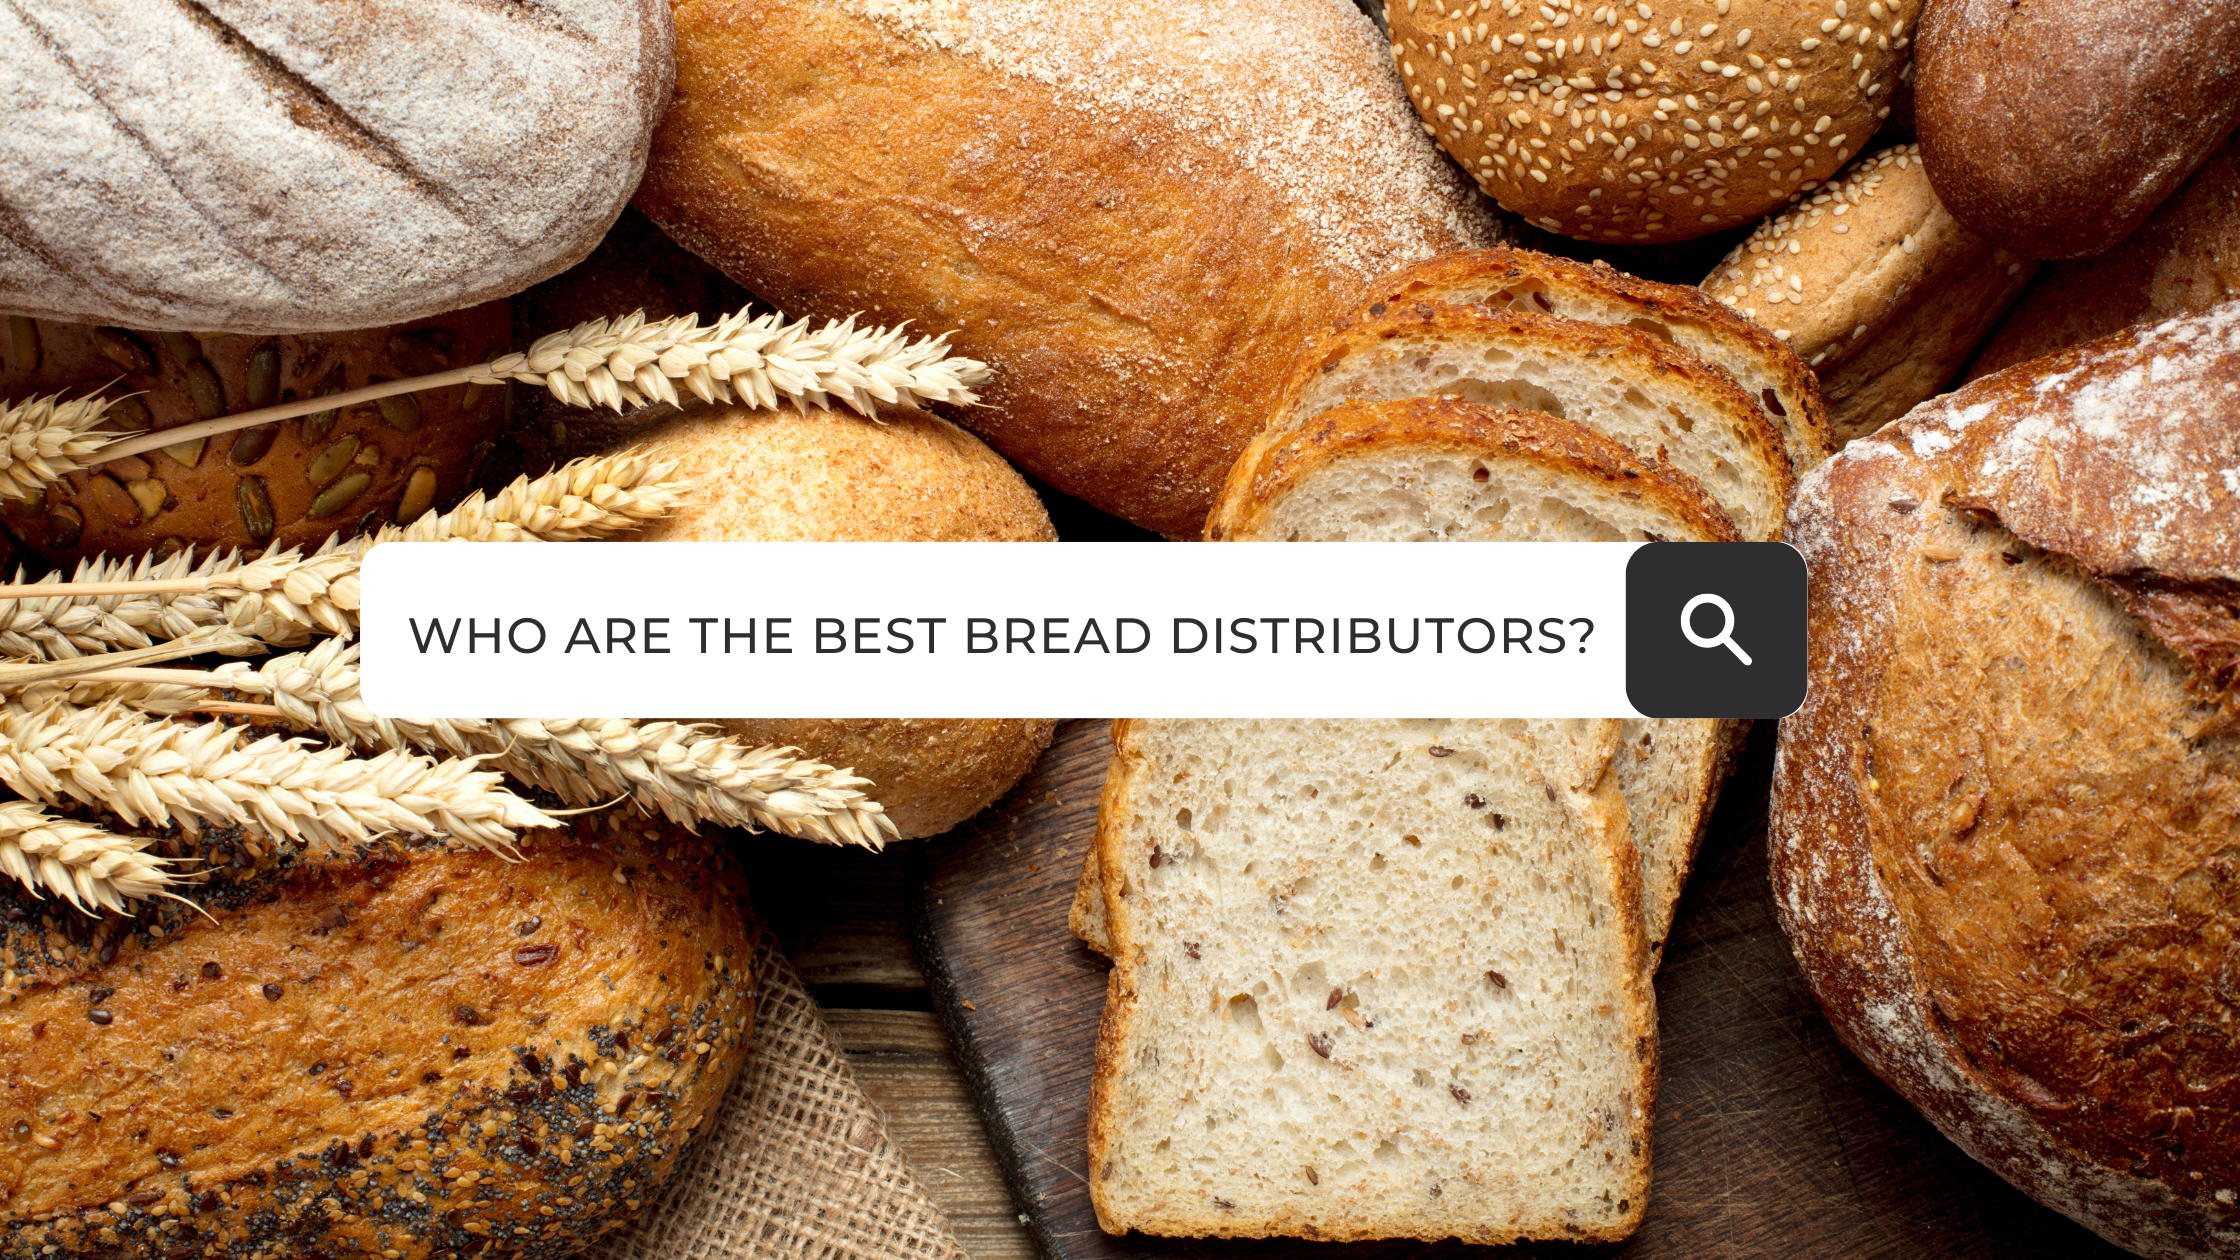 Who are the best bread distributors?